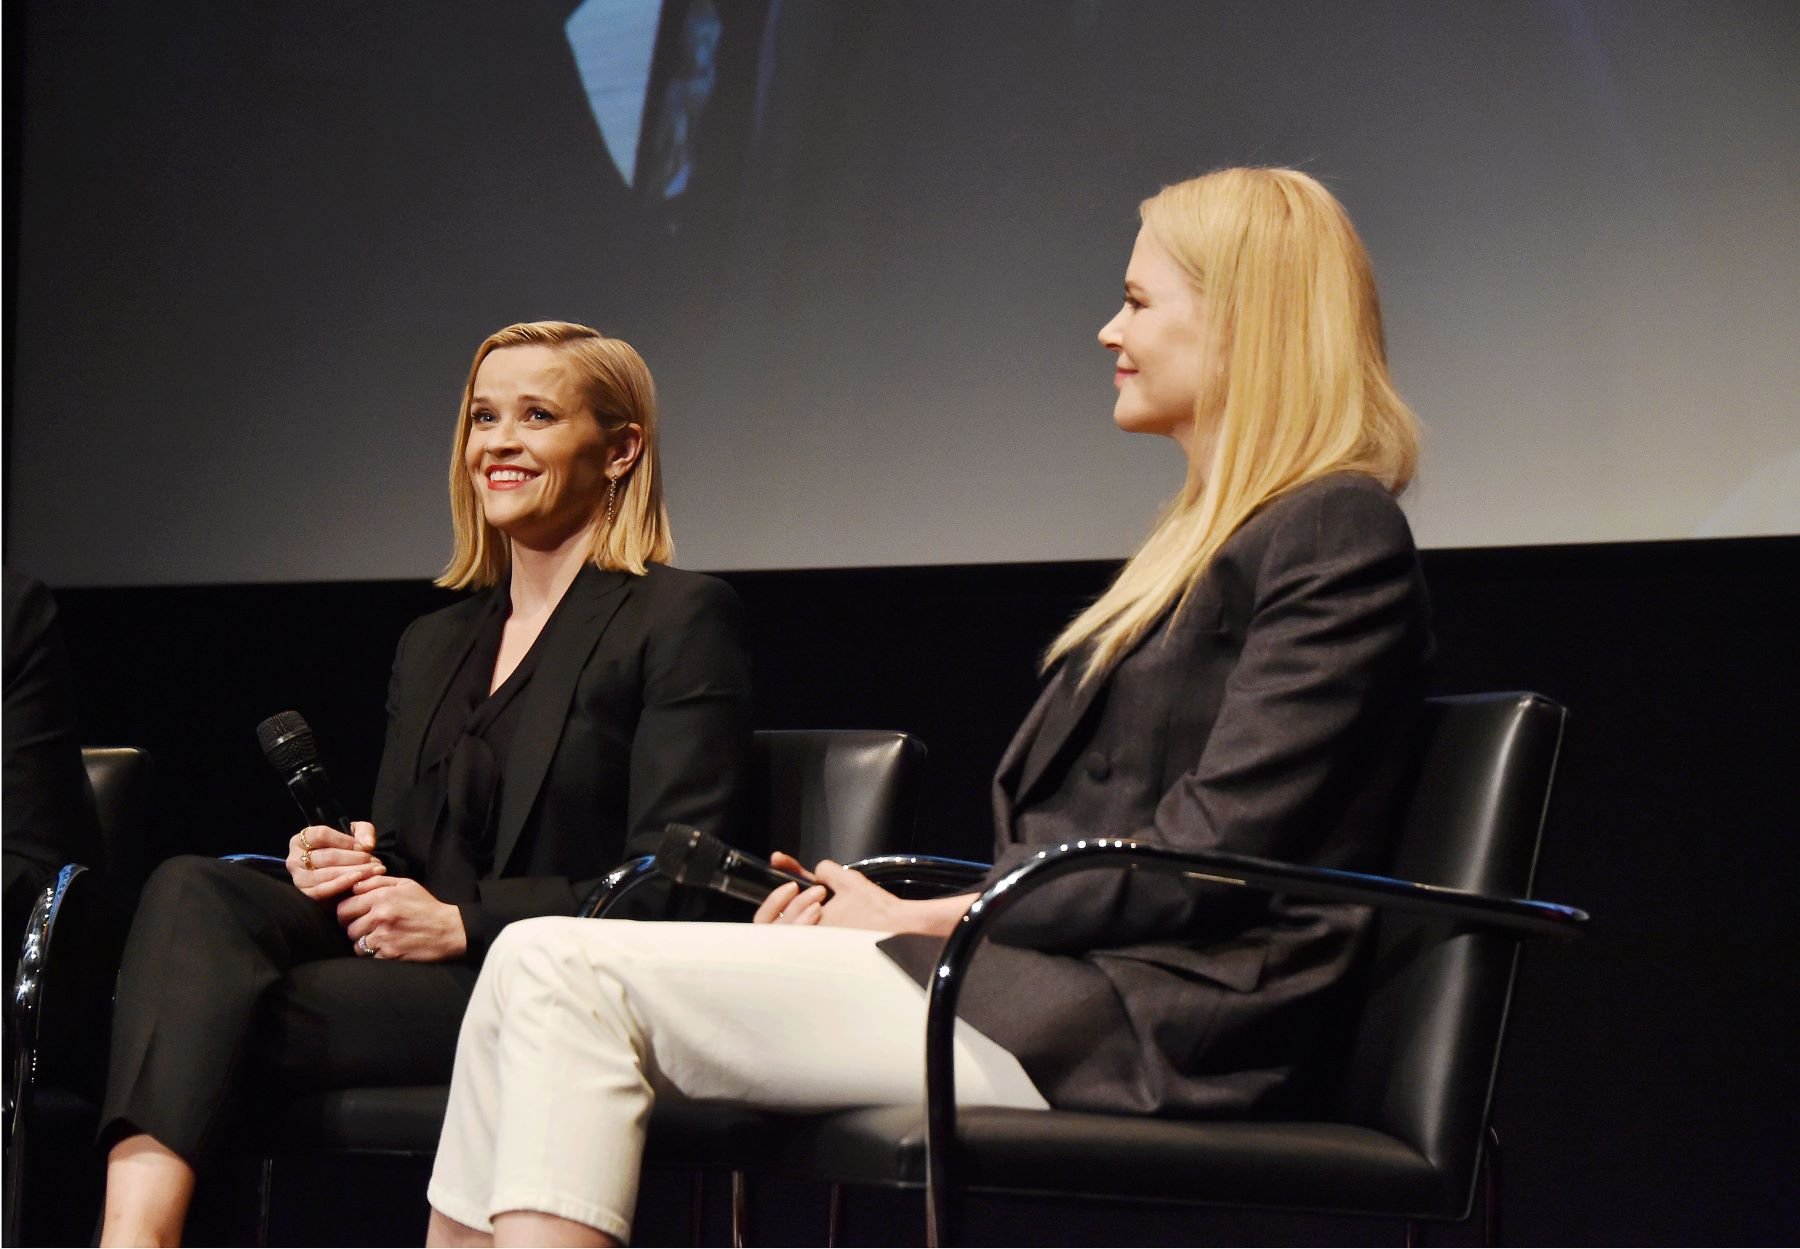 Nicole Kidman and Reese Witherspoon Called 1 ‘Big Little Lies’ Review ‘Sexist’